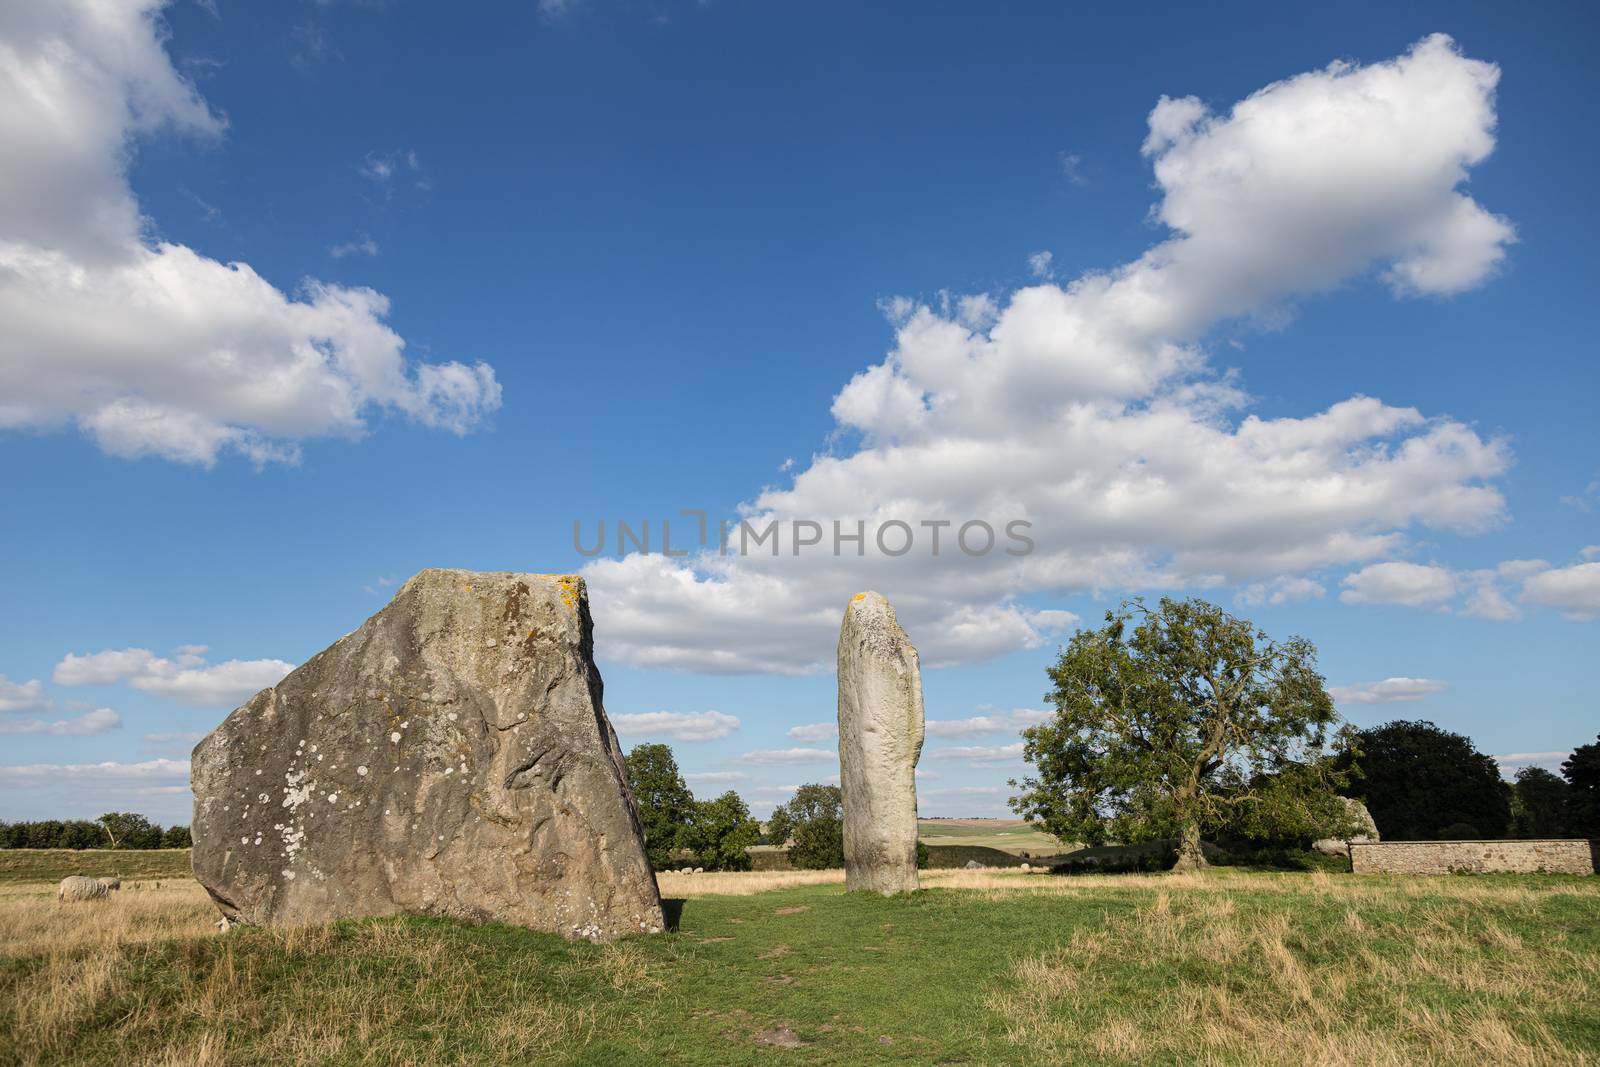 The Cove stones set against beautiful English countryside and blue skies with clouds.